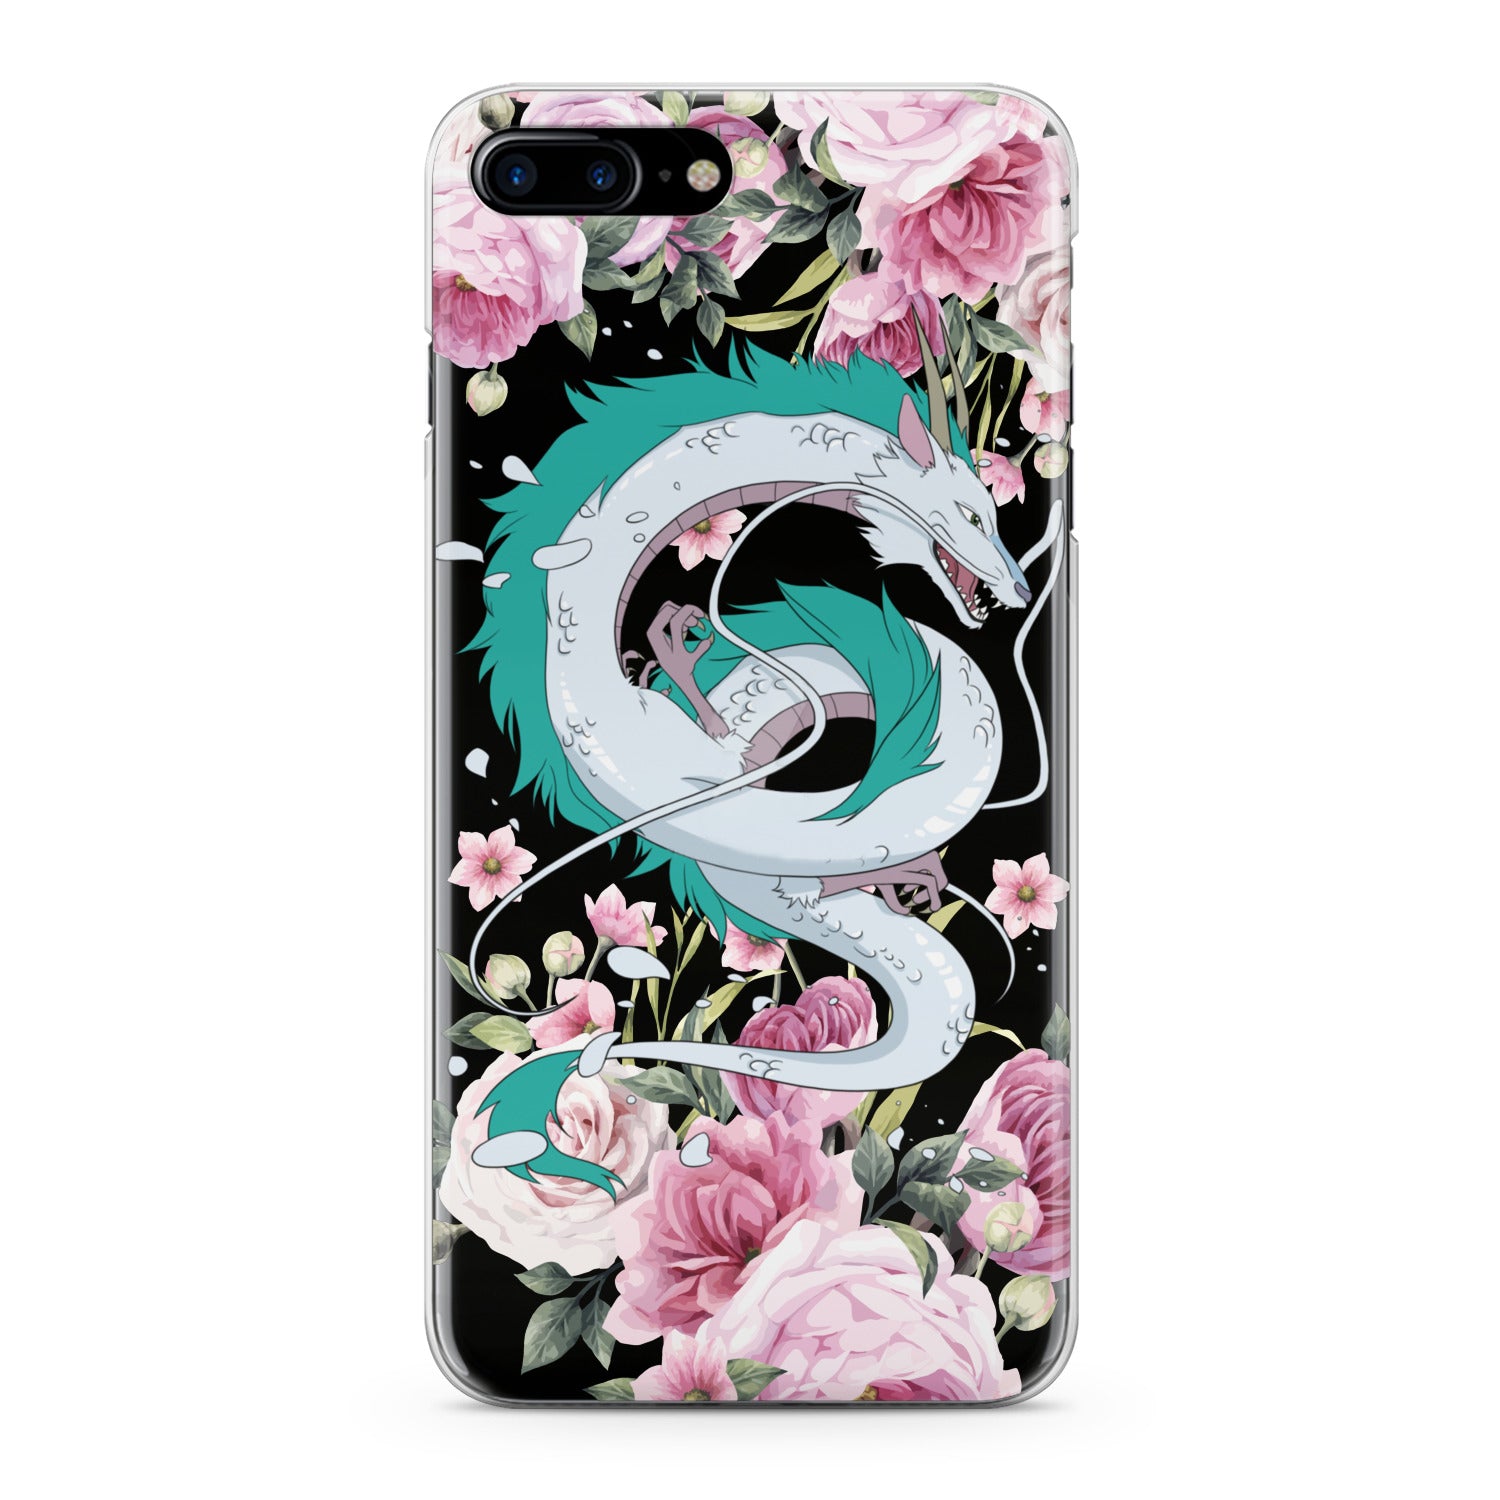 Lex Altern Floral Haku Phone Case for your iPhone & Android phone.